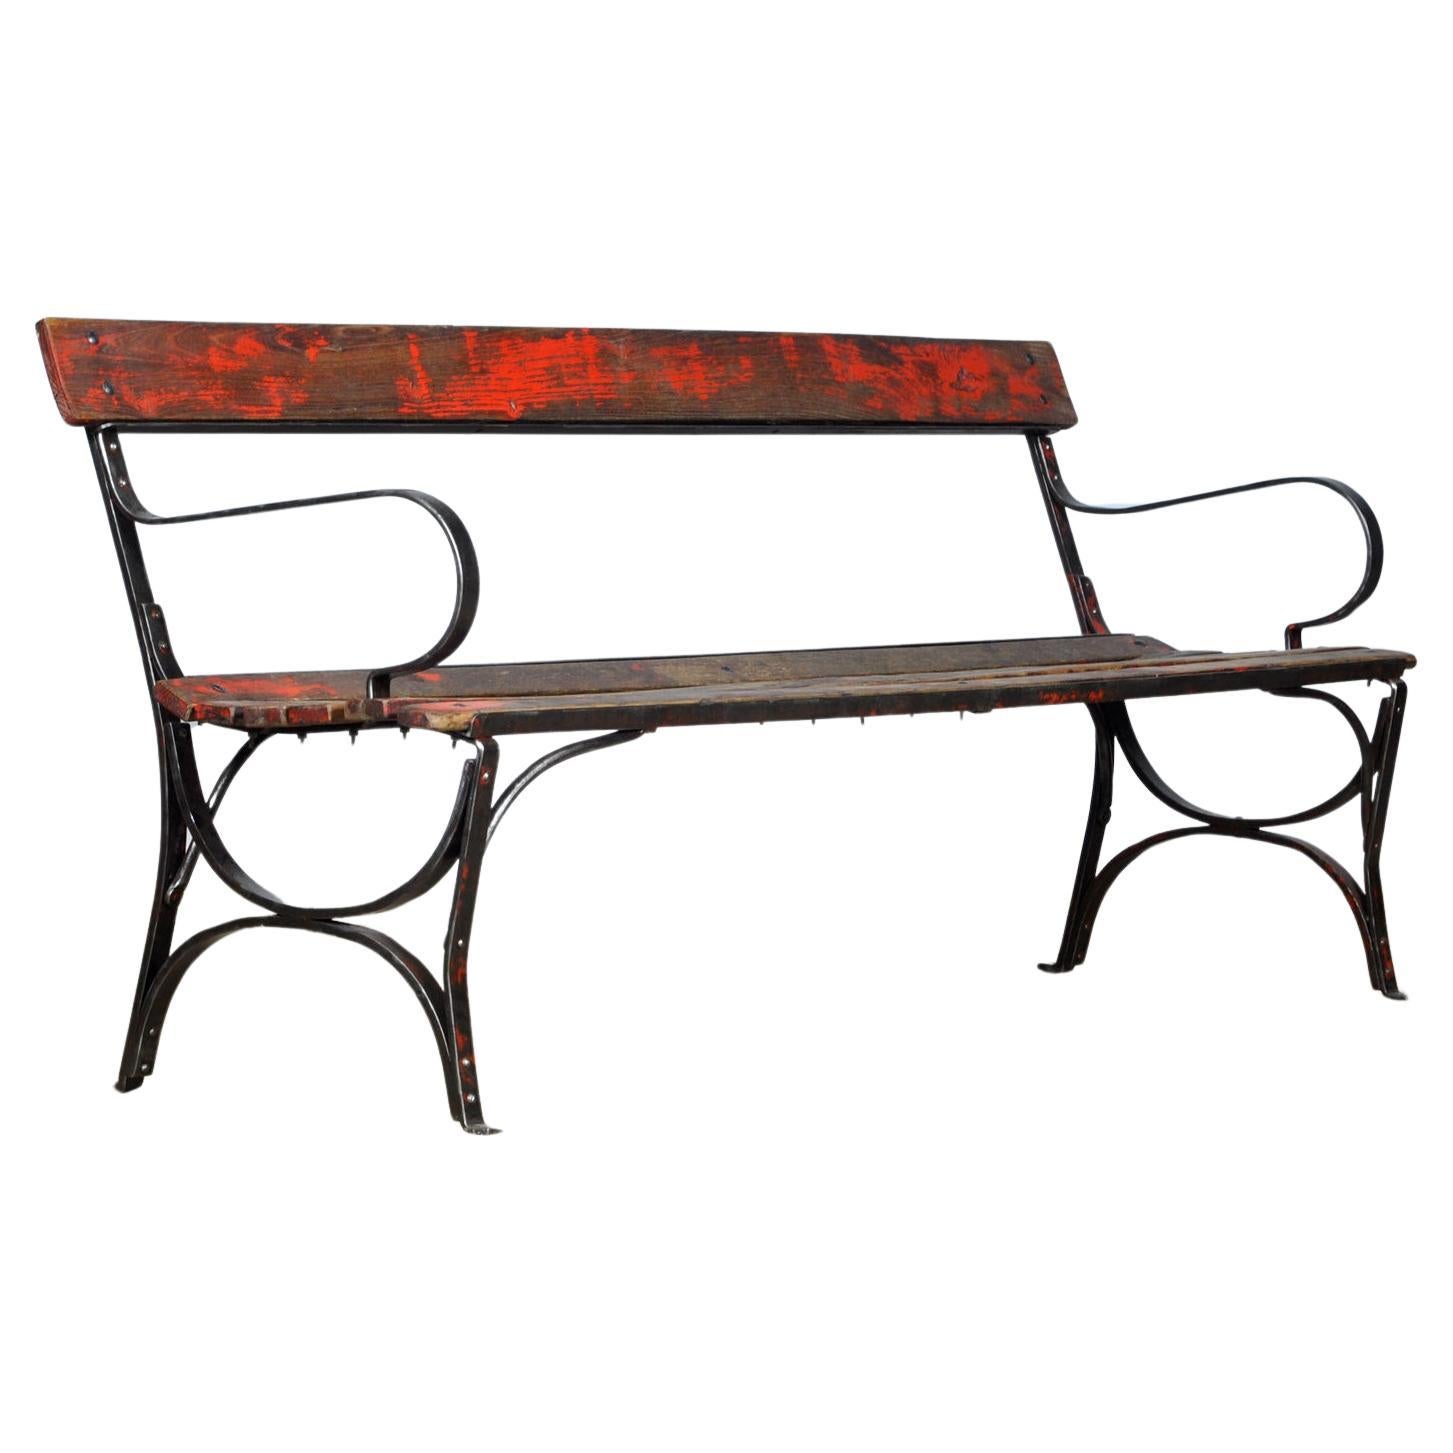  Riveted iron park bench 1920s  For Sale